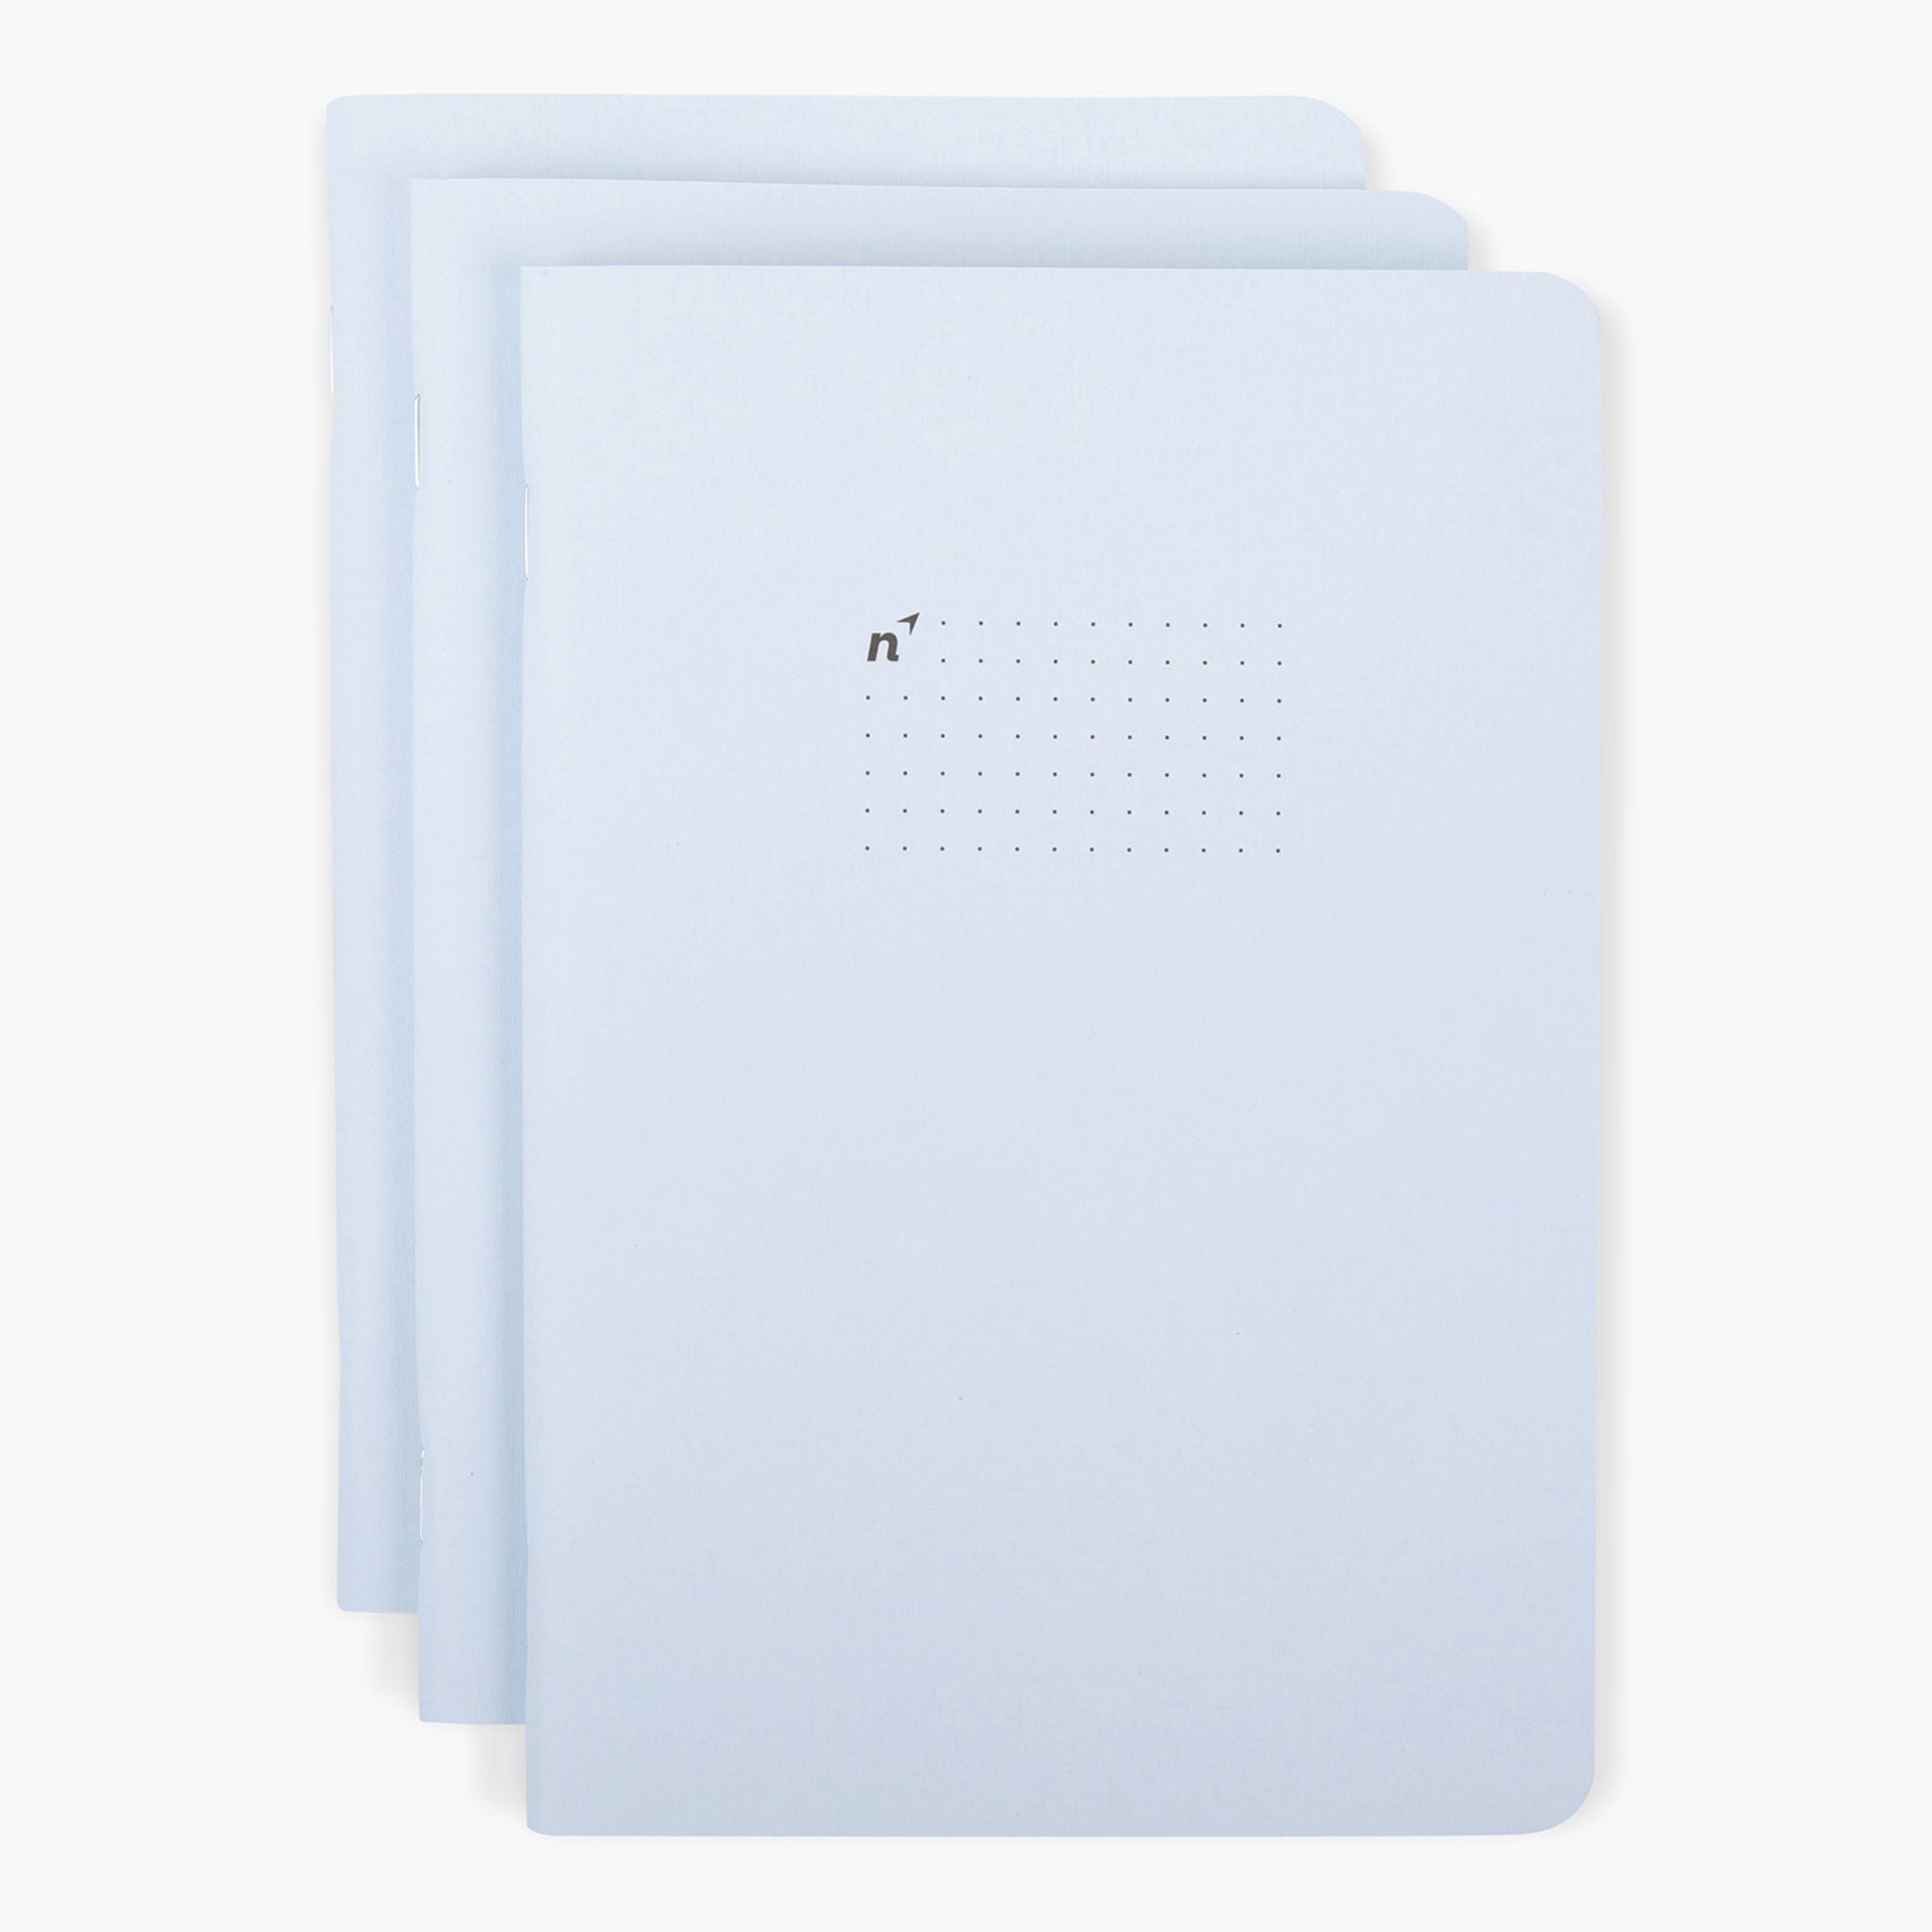 Northbooks A5 Blues - Dot-Grid Notebook Journal 3 Pack, 5.8” x 8.2”